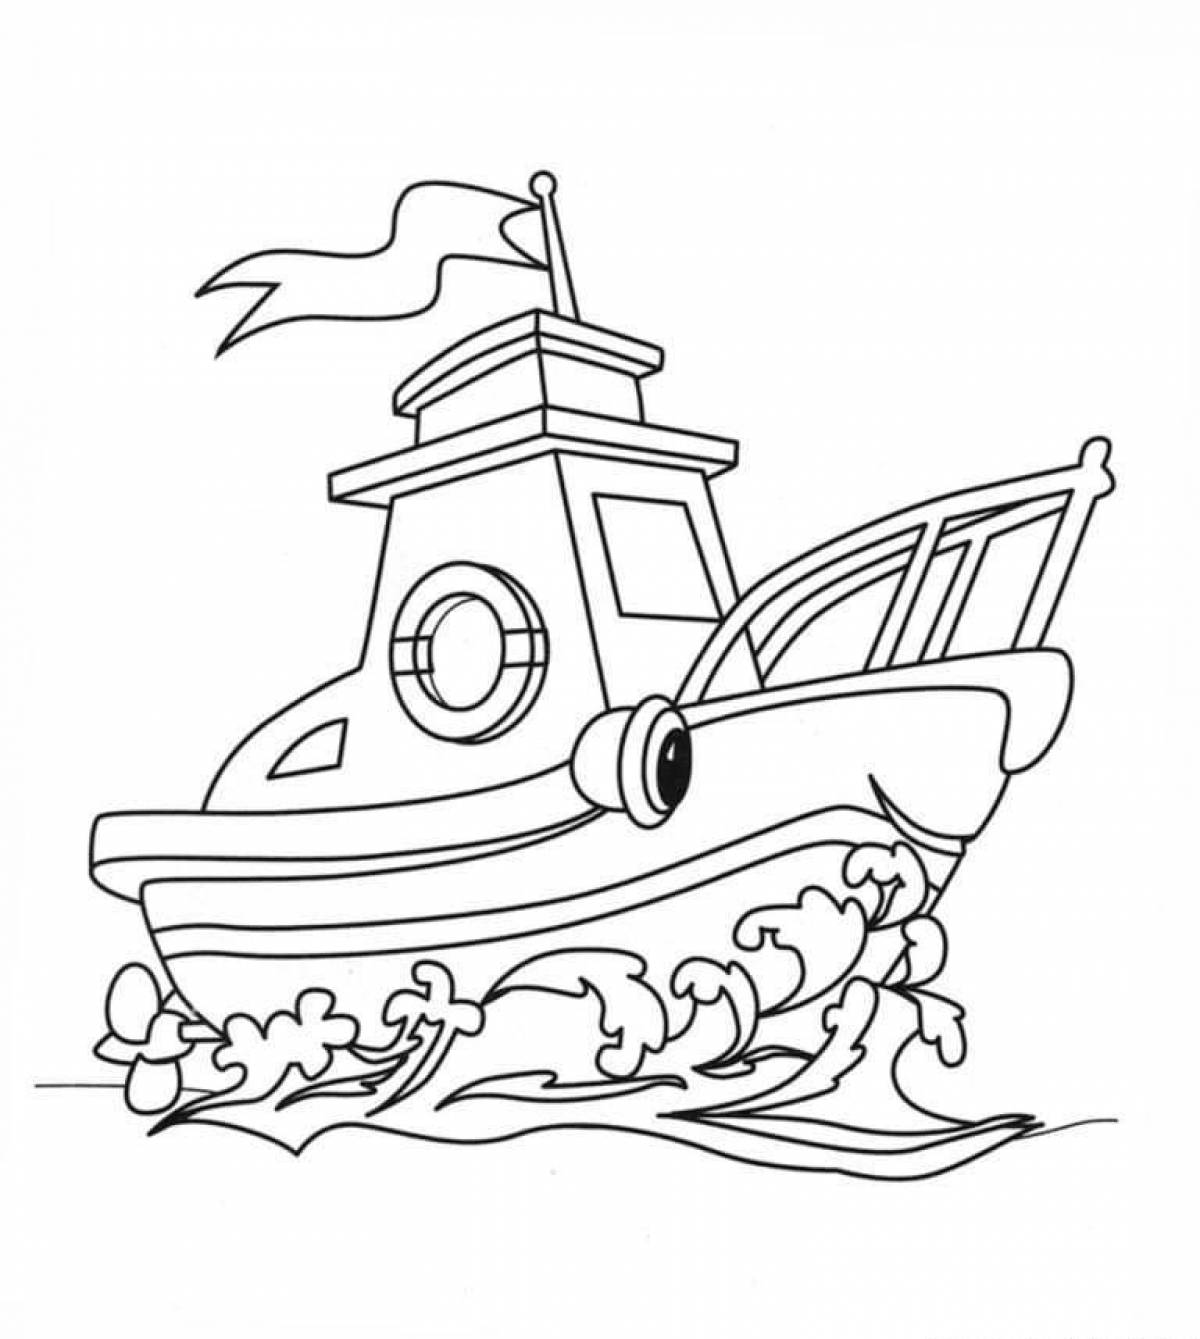 Colorful ships coloring page for kids